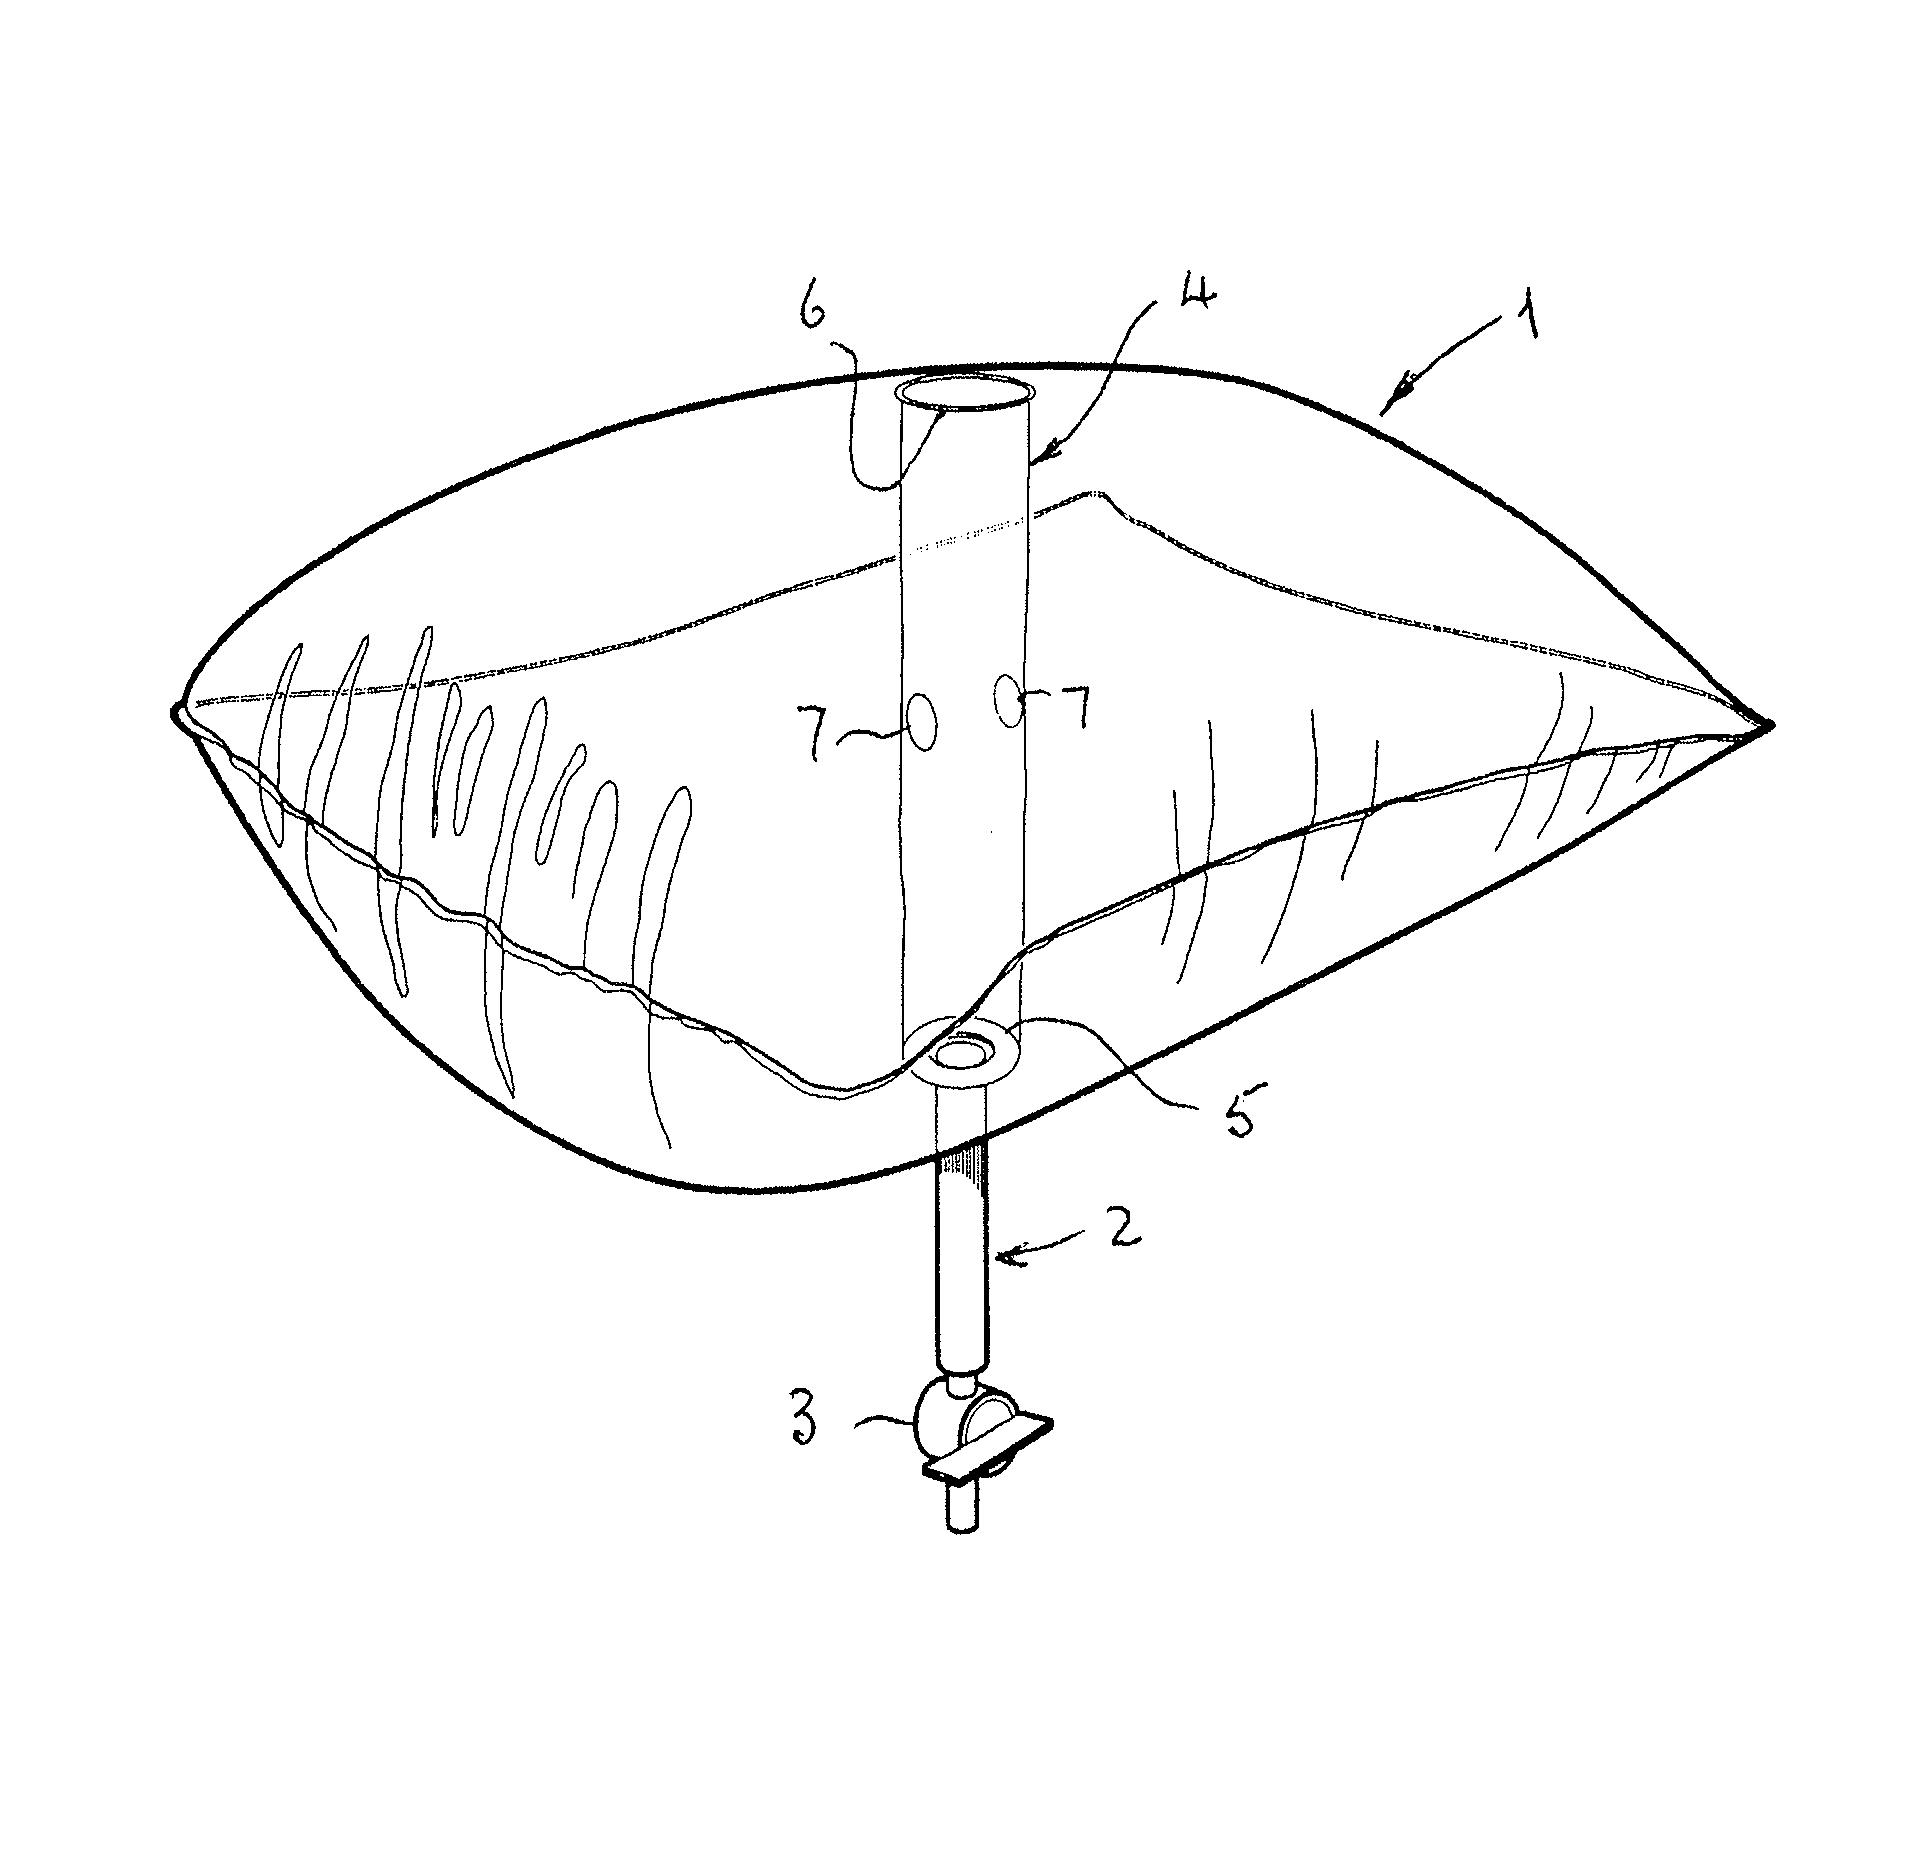 Inflatable device for blocking chimney flues or other ducts